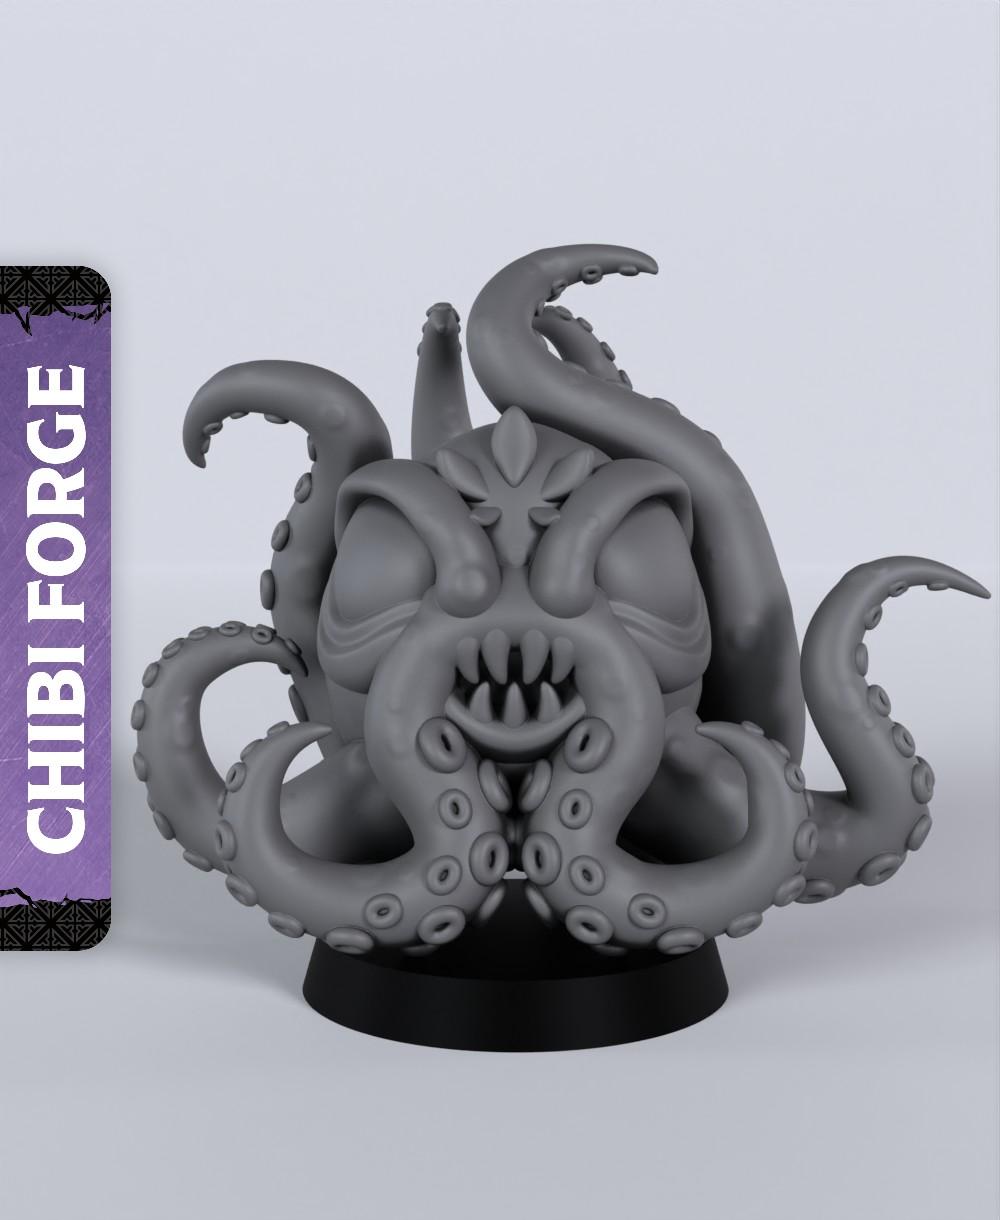 Kraken - With Free Dragon Warhammer - 5e DnD Inspired for RPG and Wargamers 3d model